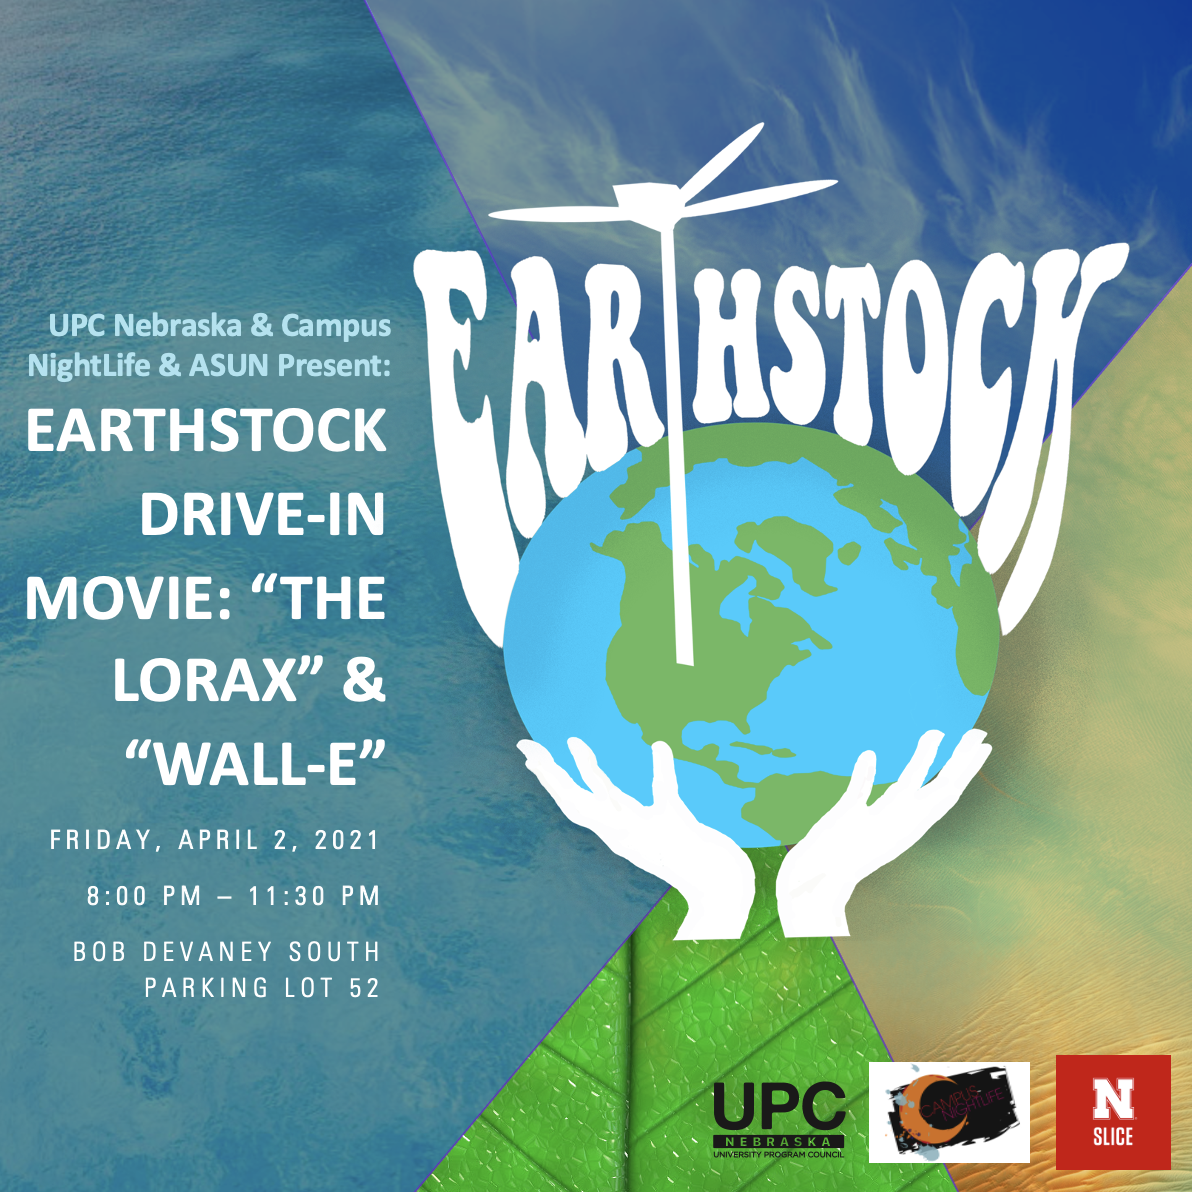 The Earthstock Drive-in double feature will show "The Lorax" and "Wall-E" on April 2.